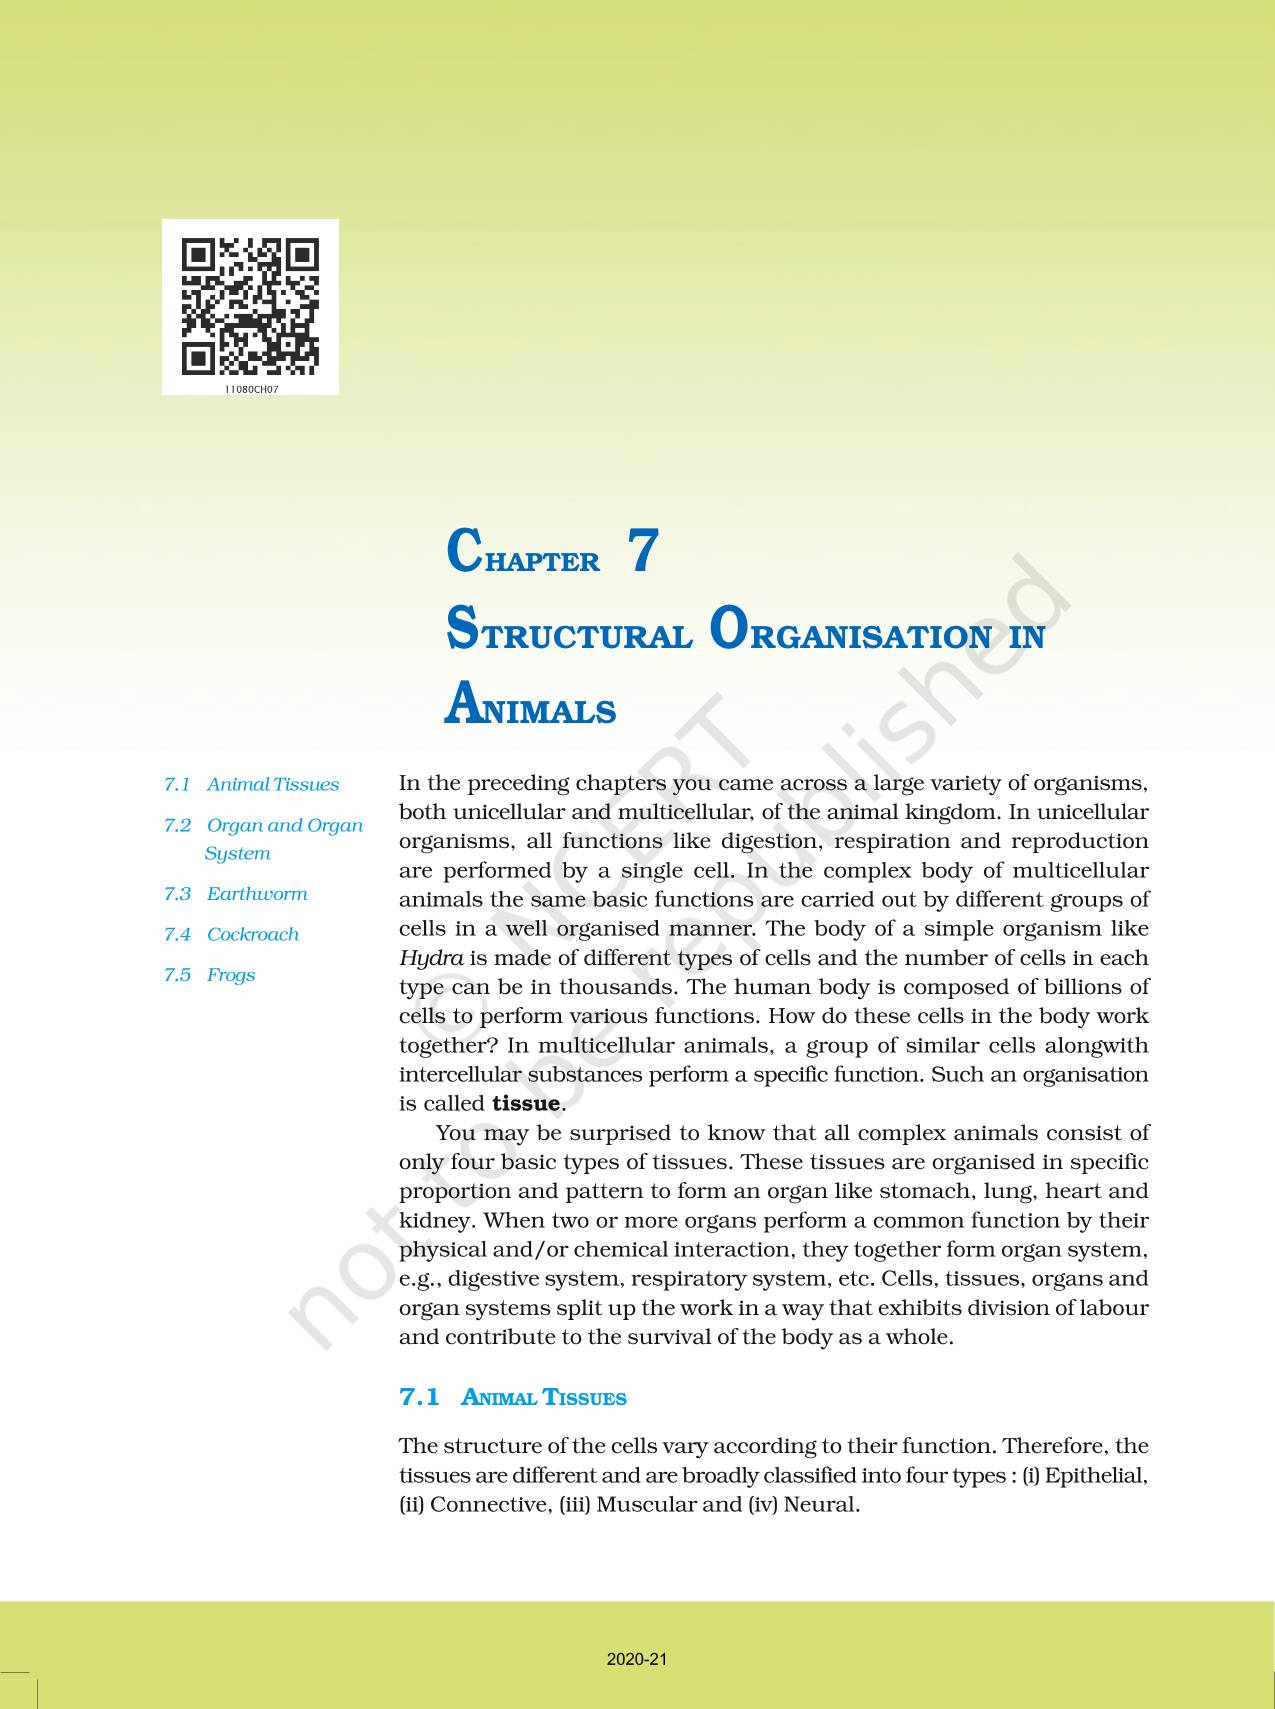 Structural Organisation In Animals - NCERT Book of Class 11 Biology